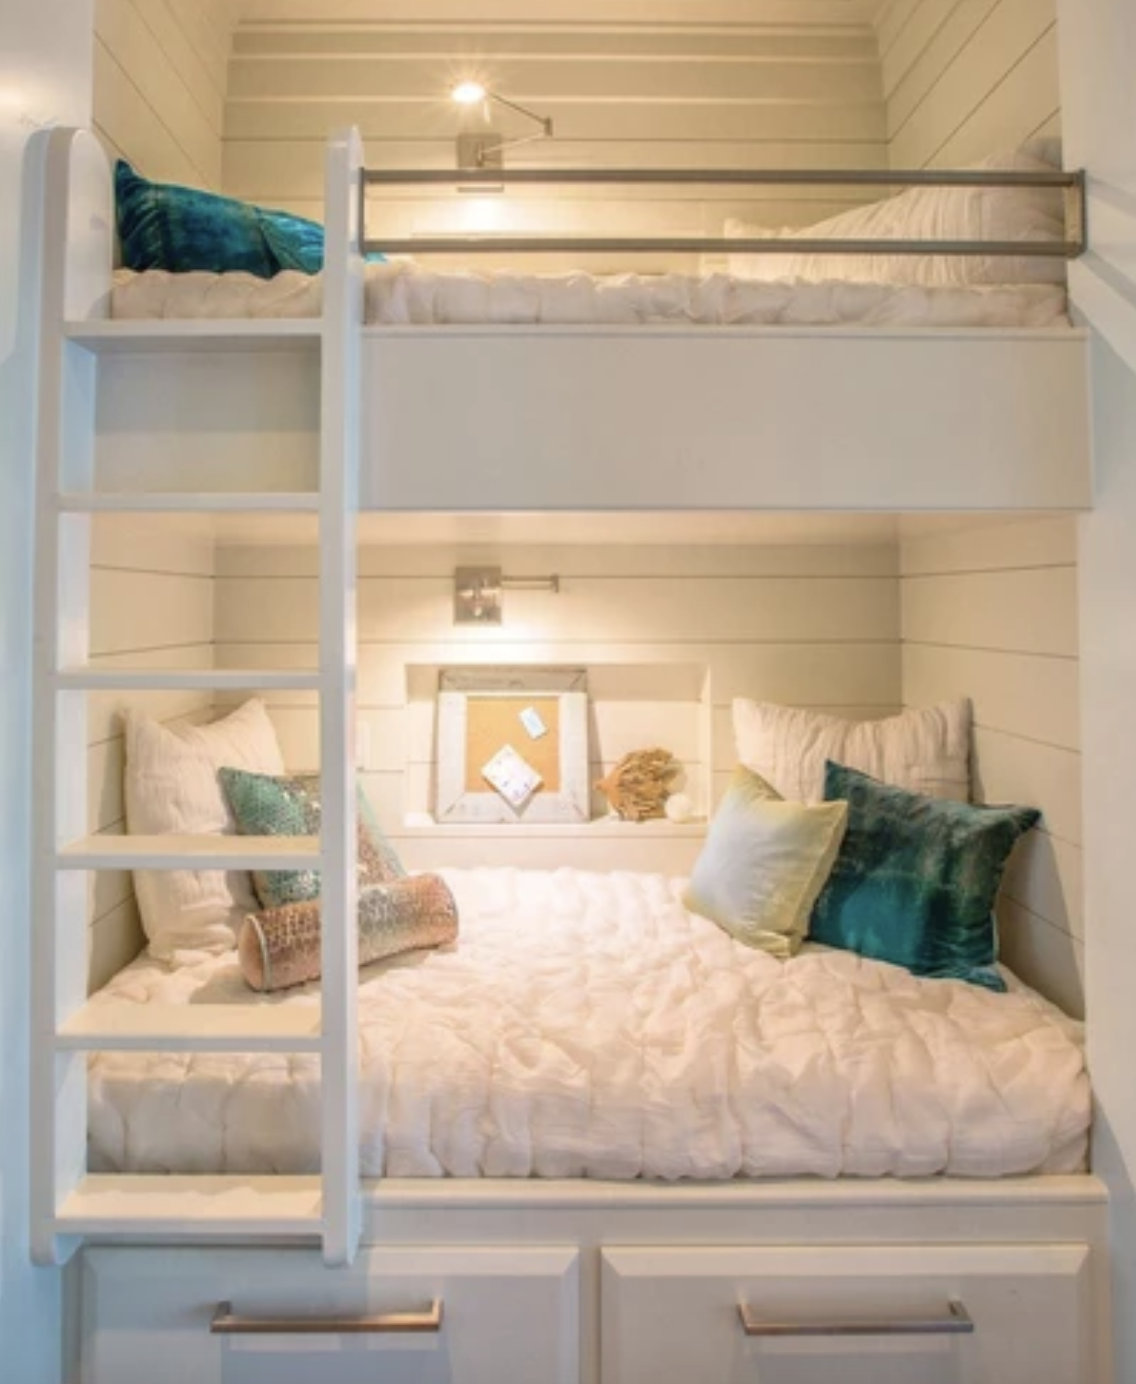 bunk bed in small room